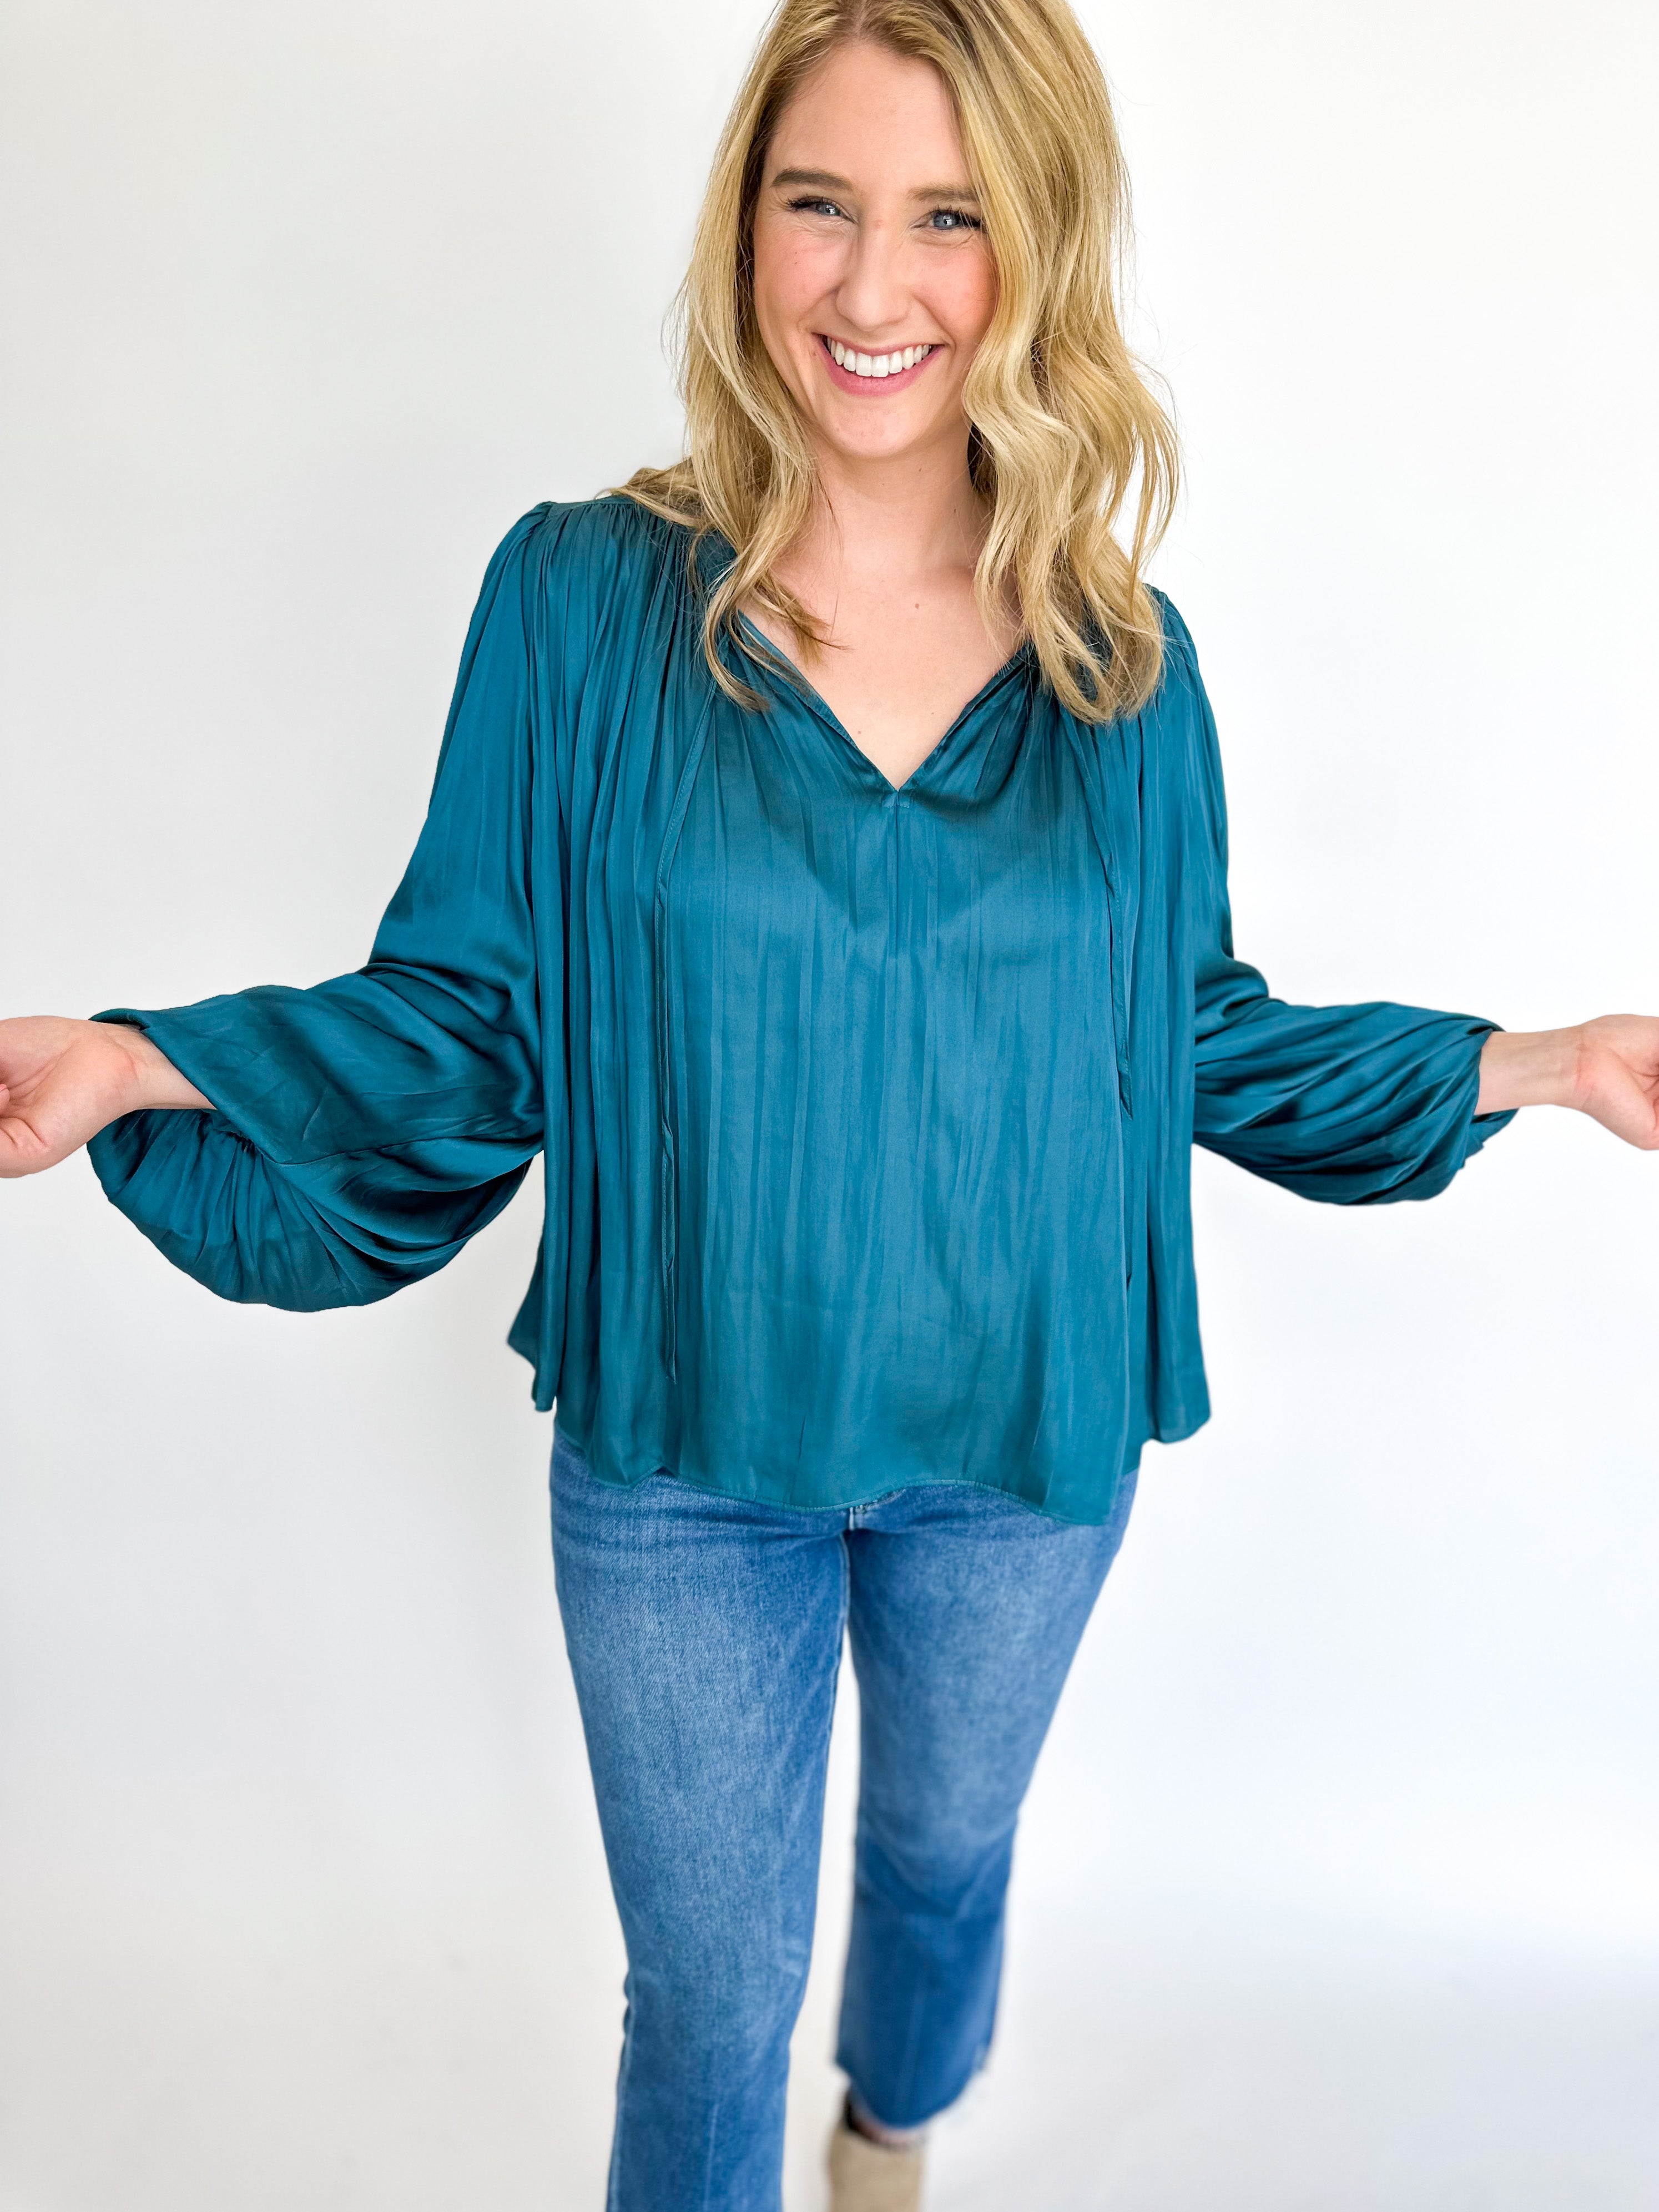 Dreamy Dark Teal Blouse-200 Fashion Blouses-CURRENT AIR CLOTHING-July & June Women's Fashion Boutique Located in San Antonio, Texas